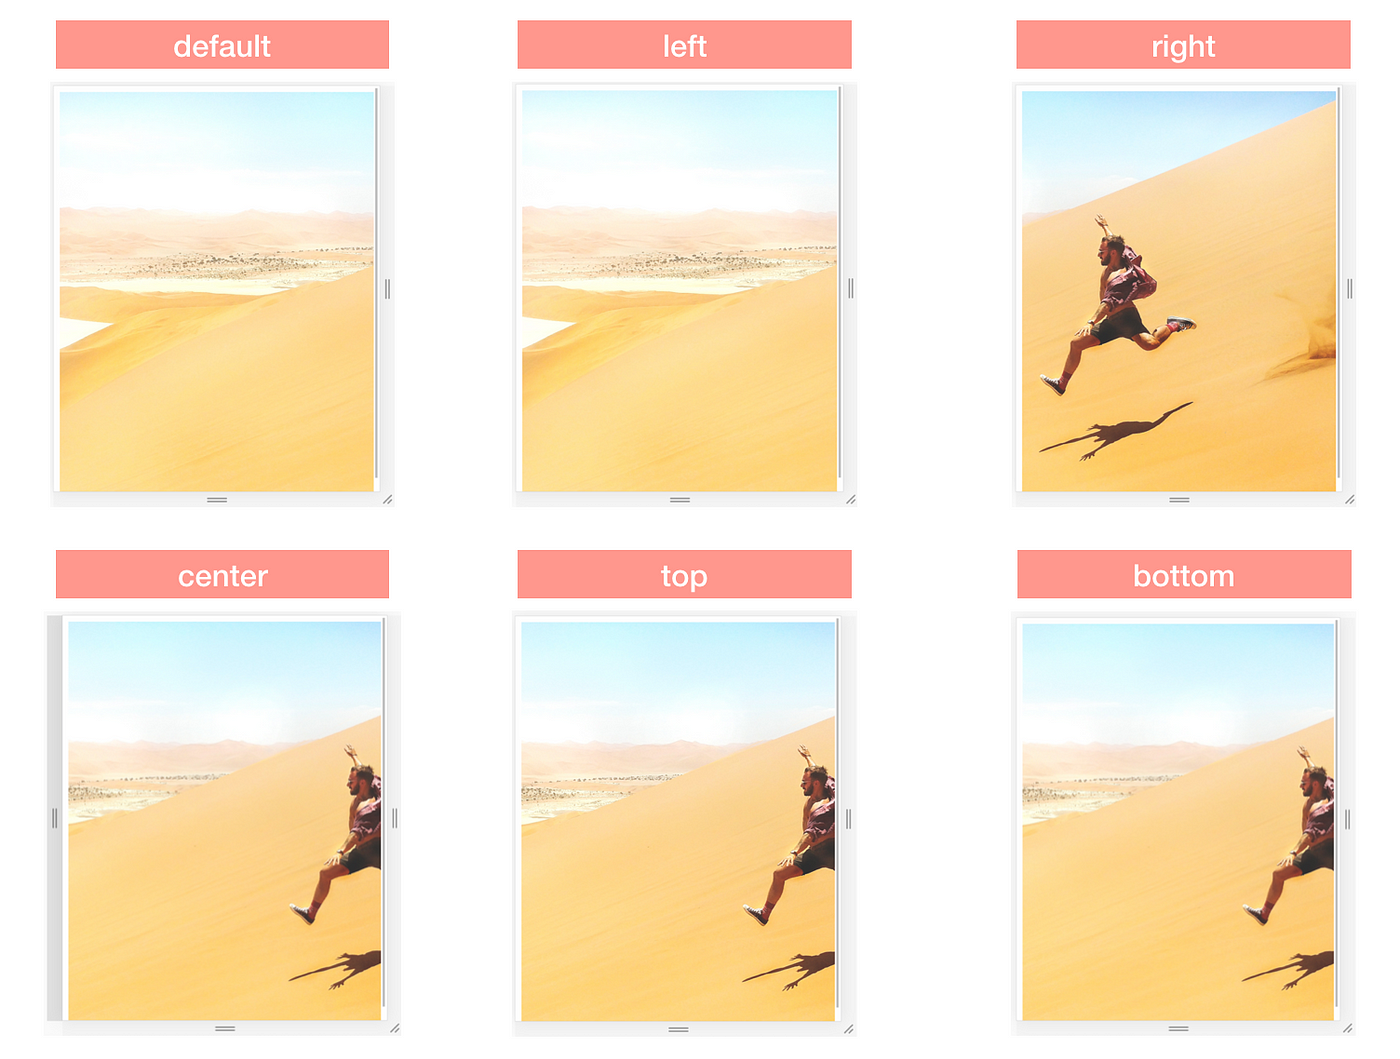 How to Position Background Images With CSS | by aliceyt | Better Programming